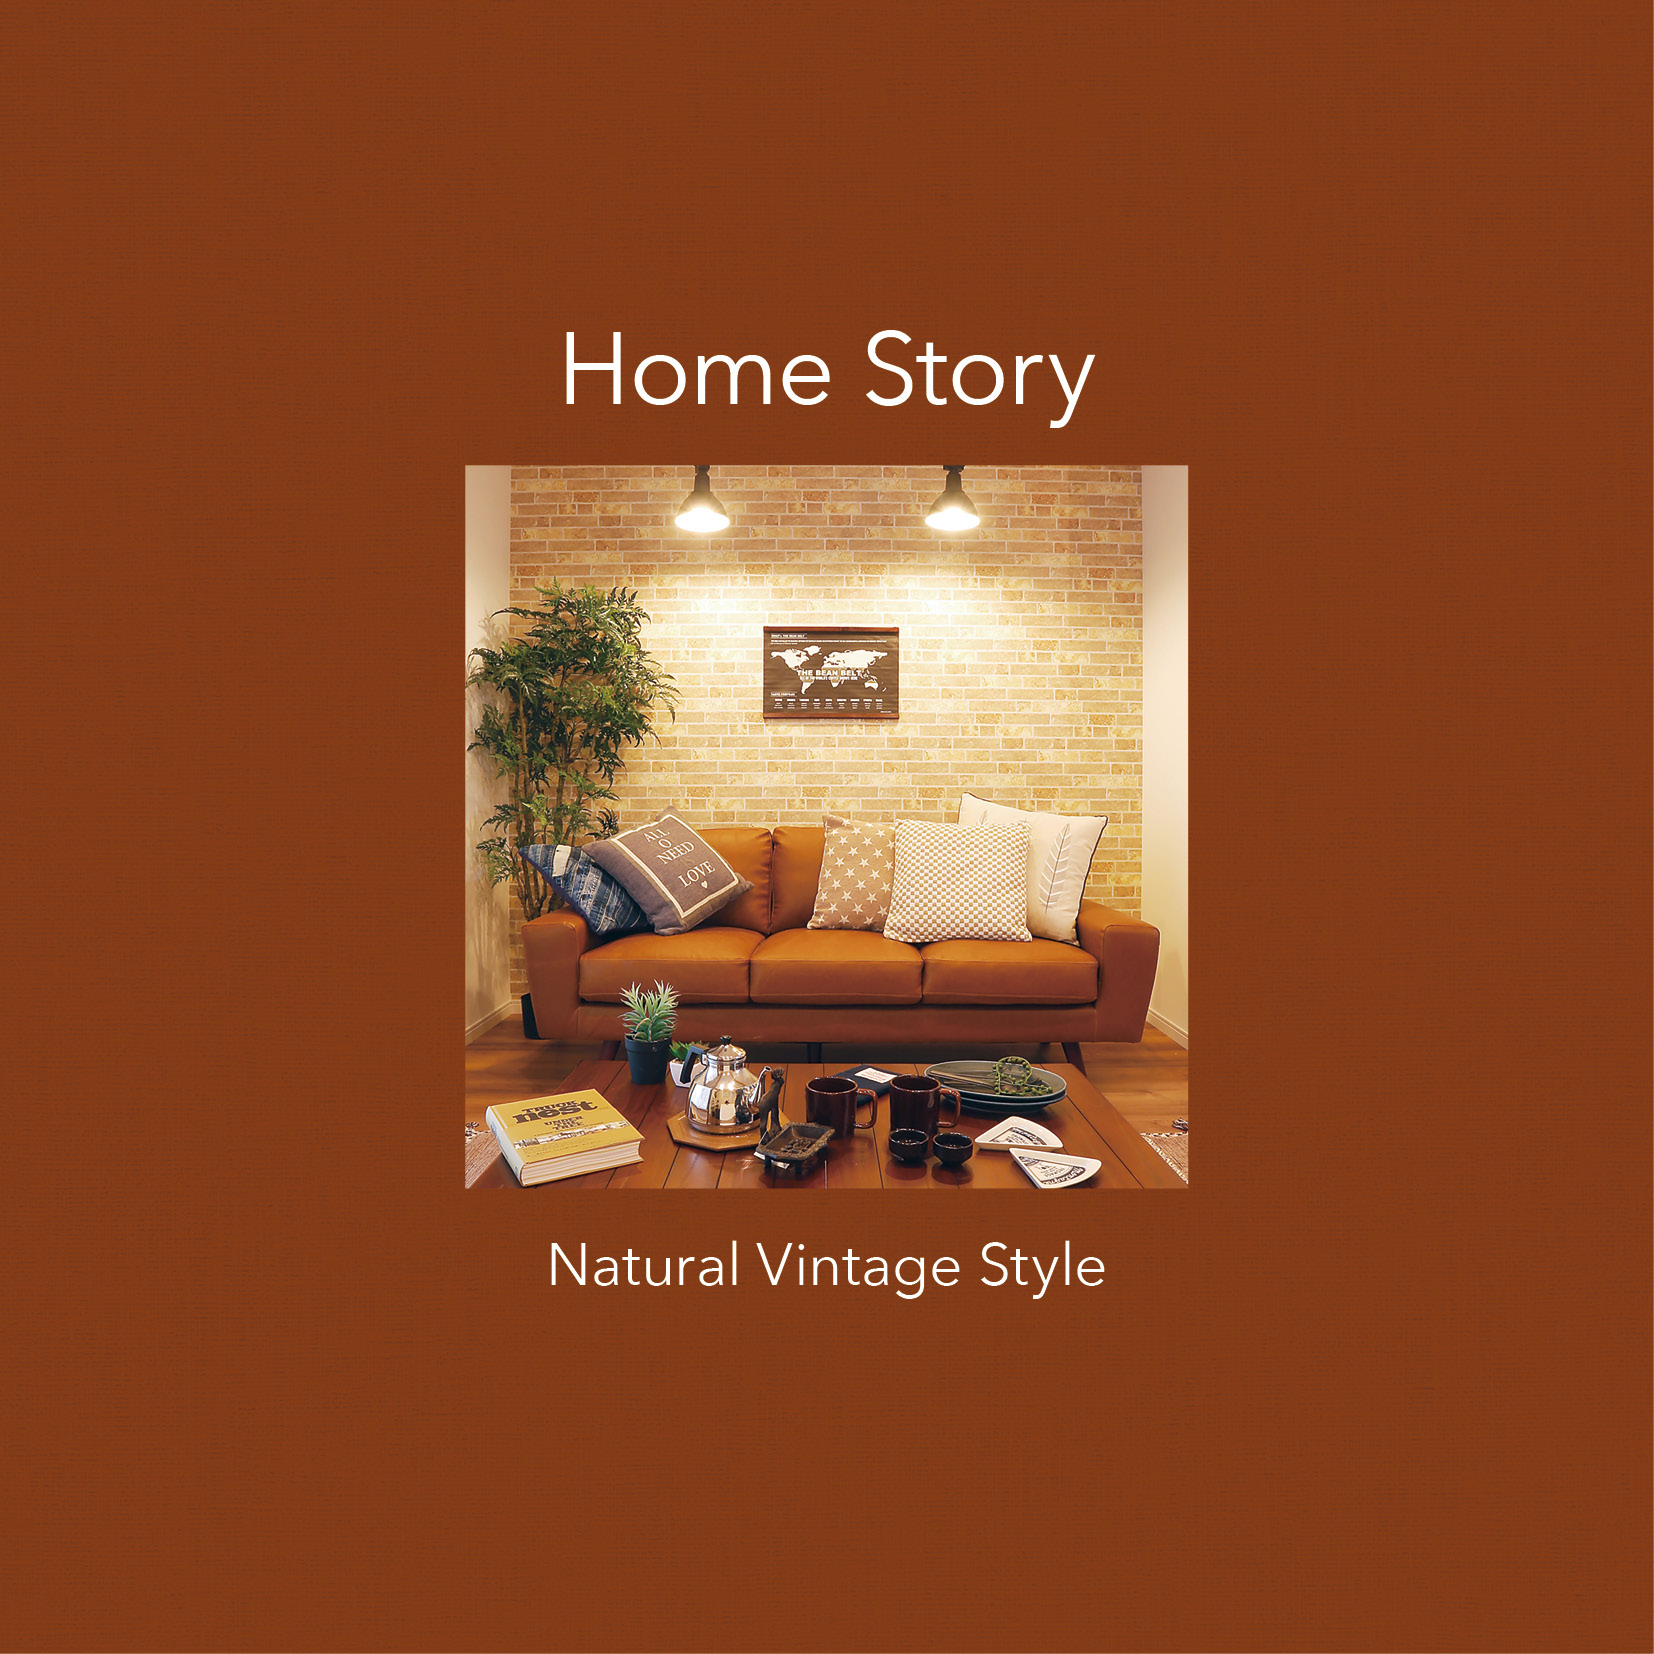 ～CaféStyleのかっこいい私の暮らし～Natural Vintage Style